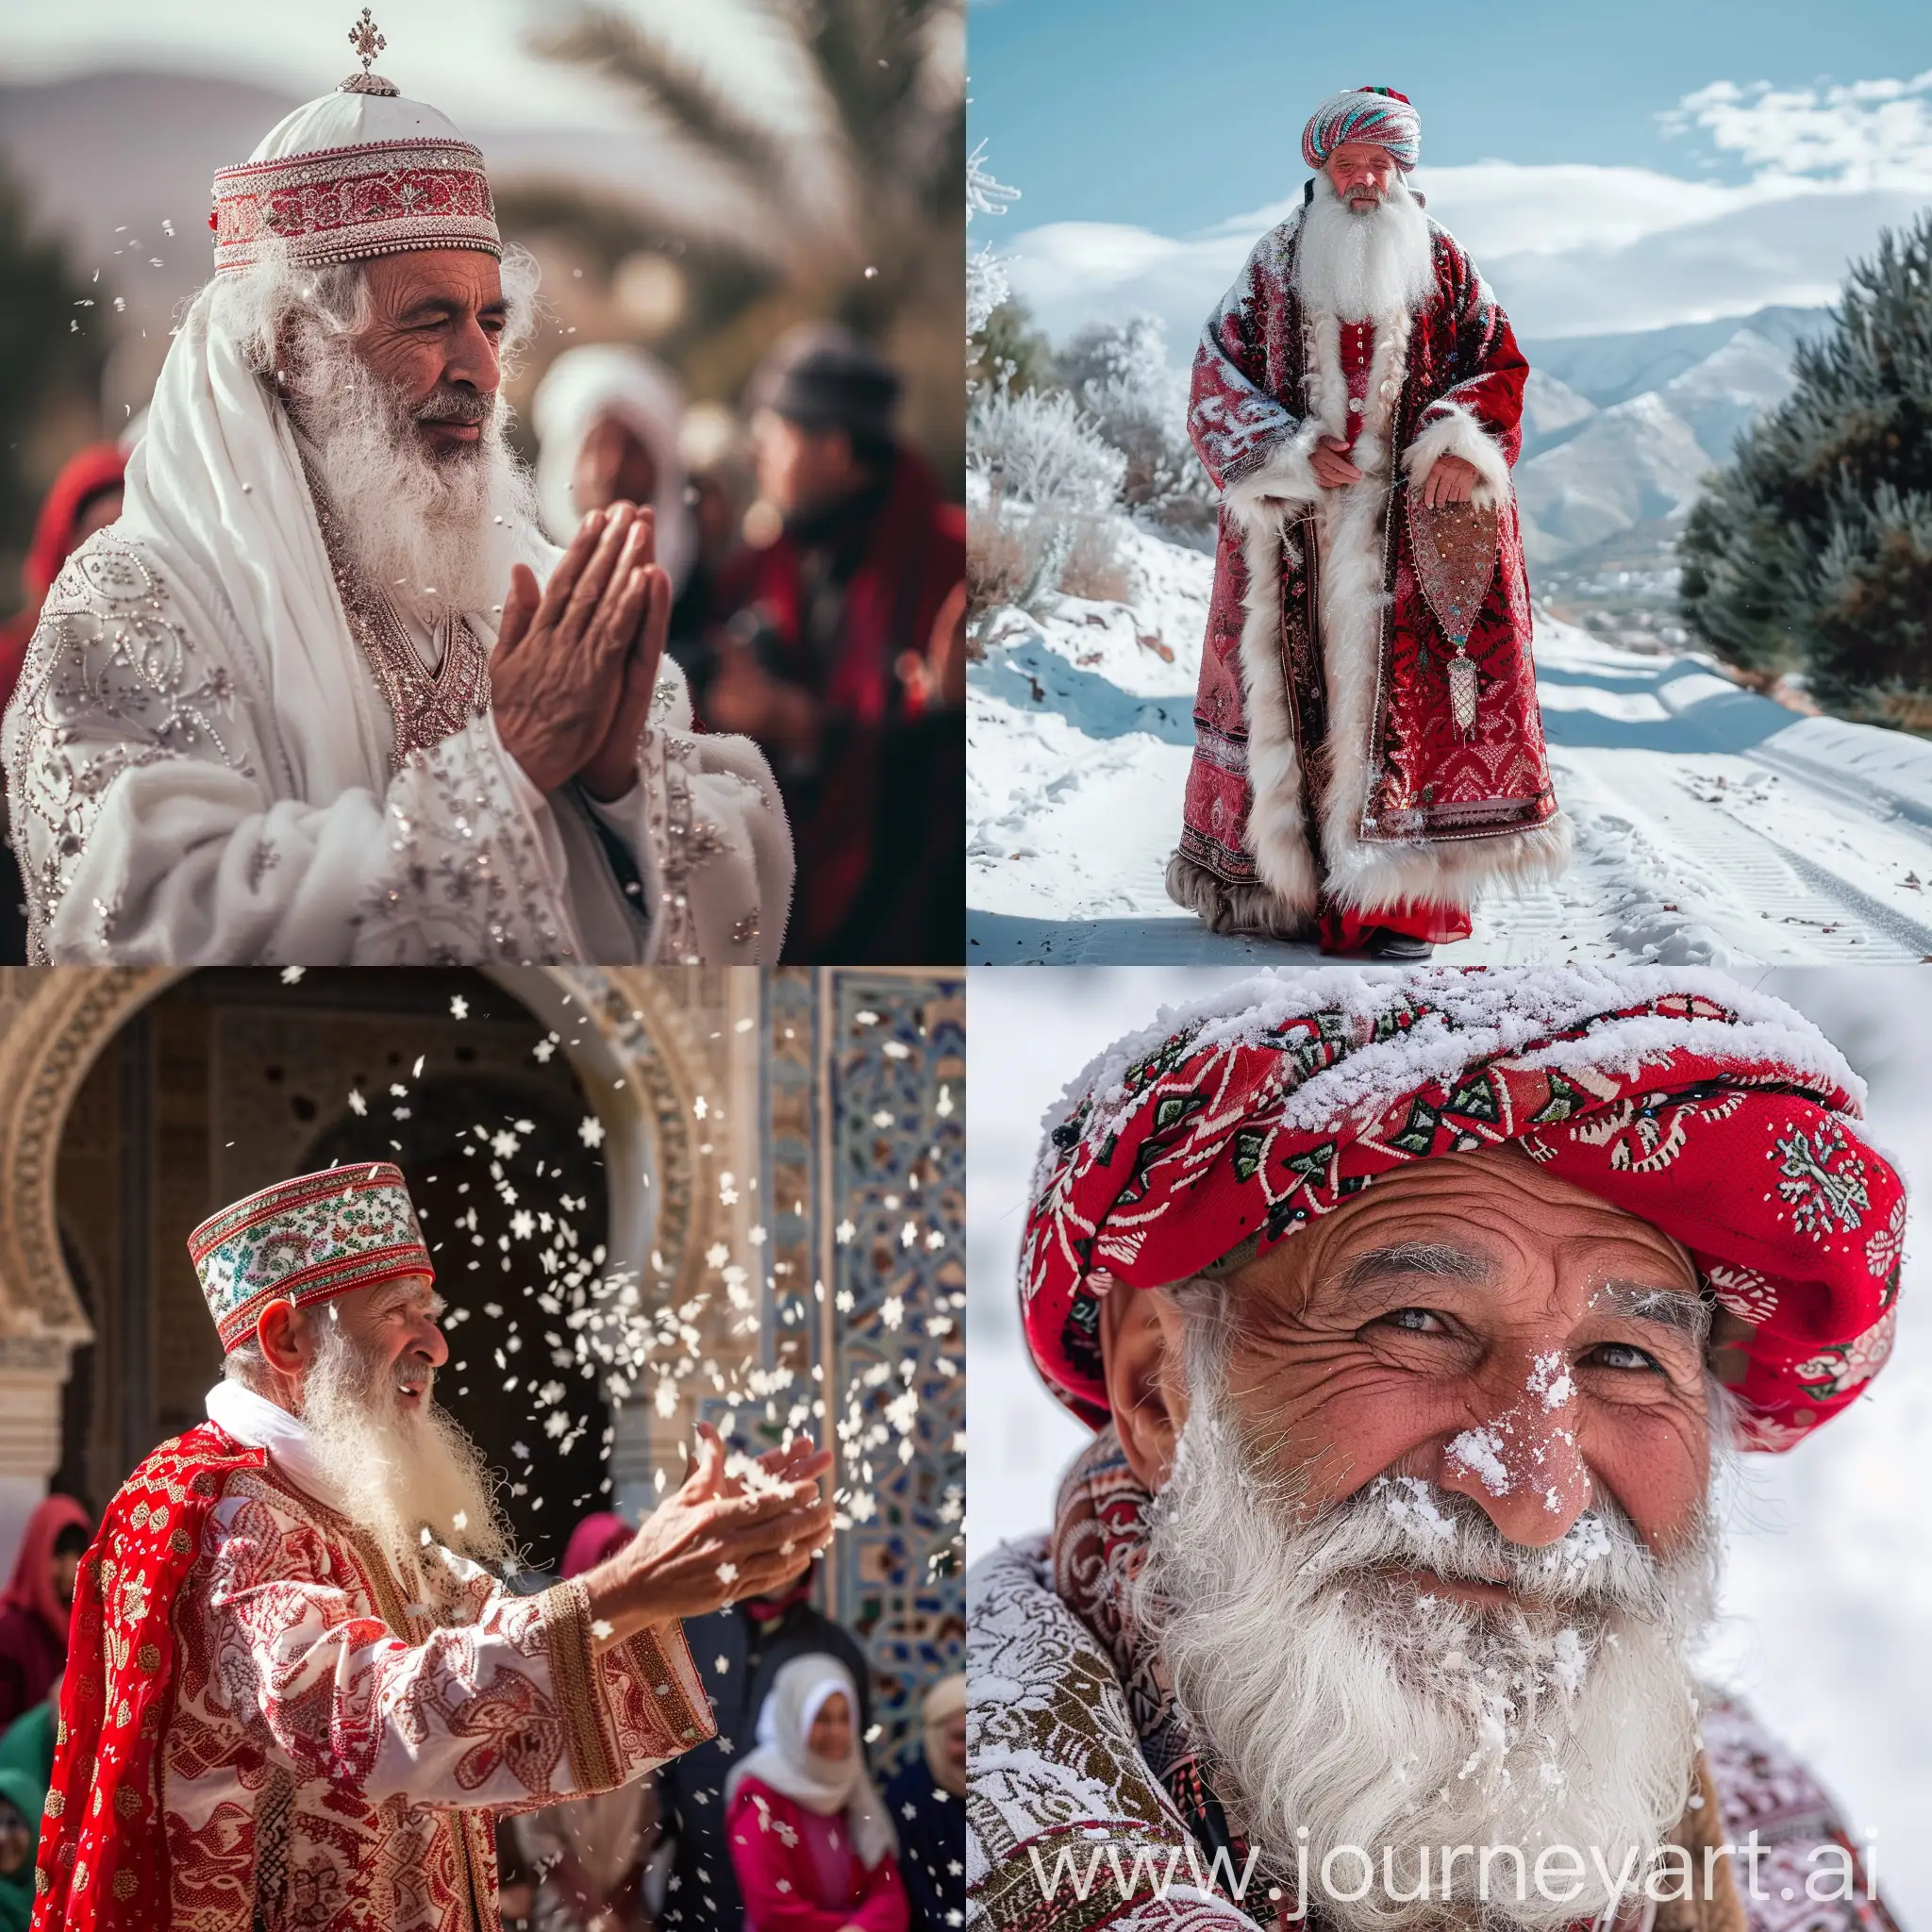 Ded-Moroz-Visiting-Morocco-Festive-Winter-Spirit-in-North-African-Setting